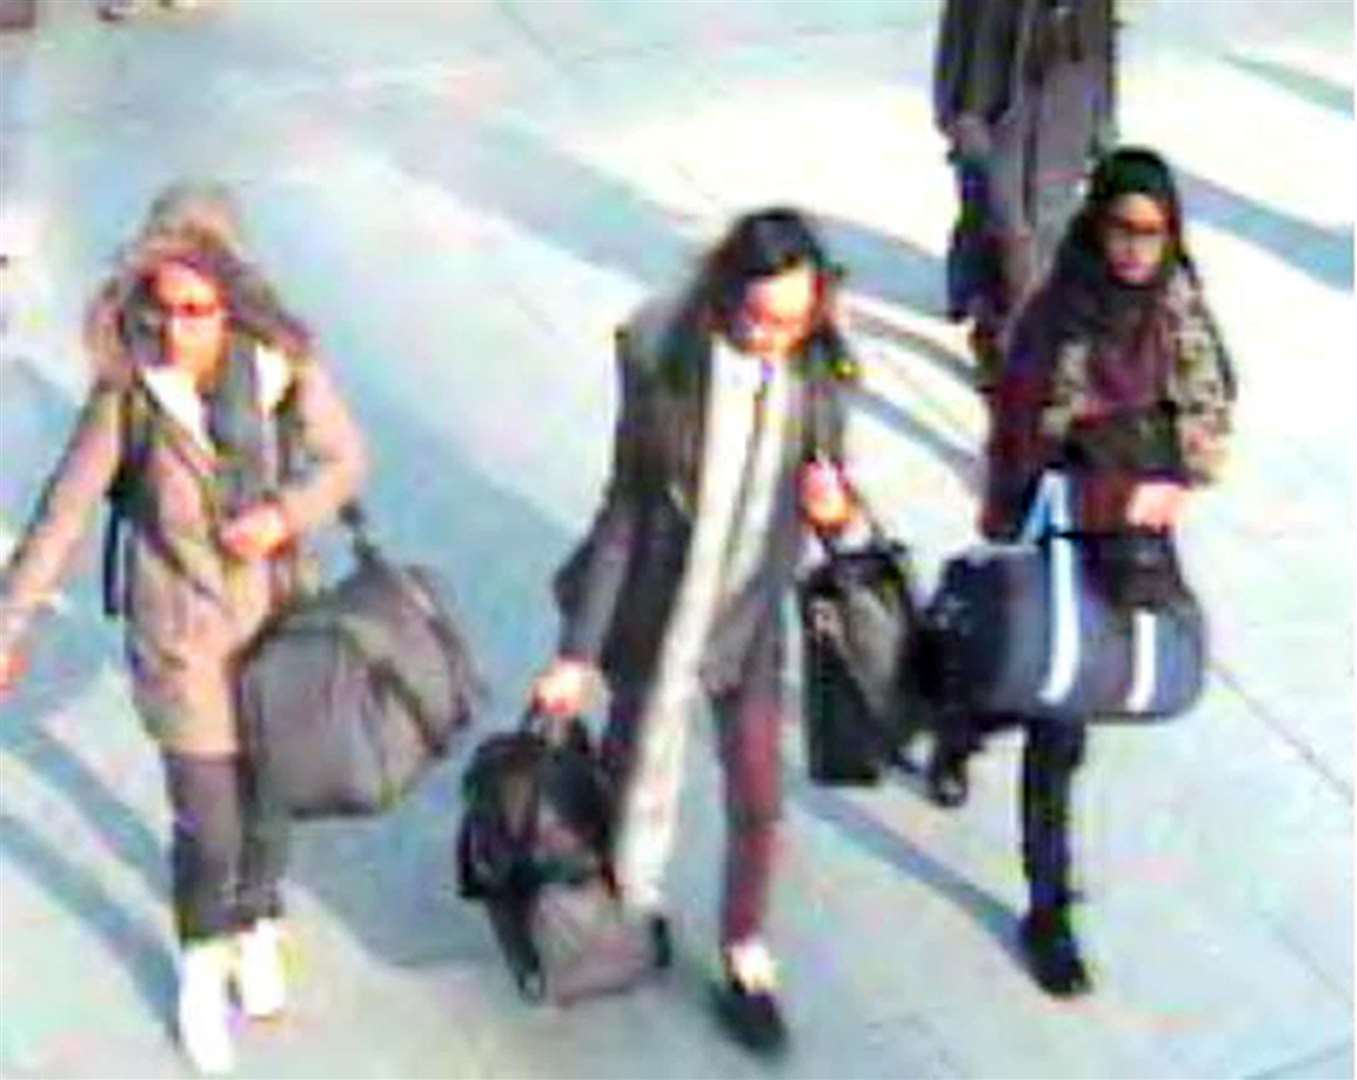 Shamima Begum, then 15, right, at Gatwick Airport on her way to Syria in February 2015 (Metropolitan Police/PA)